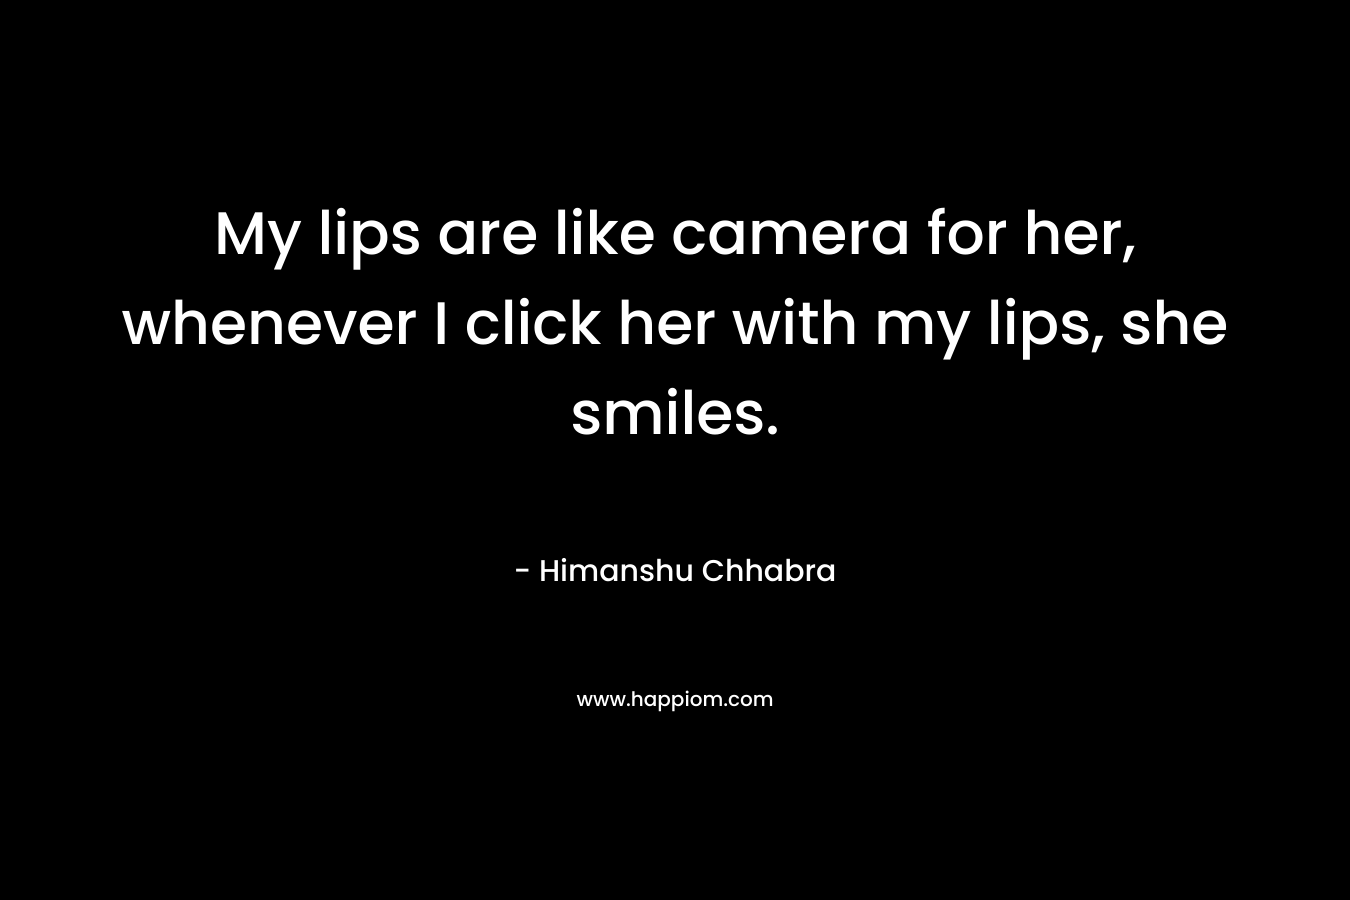 My lips are like camera for her, whenever I click her with my lips, she smiles.